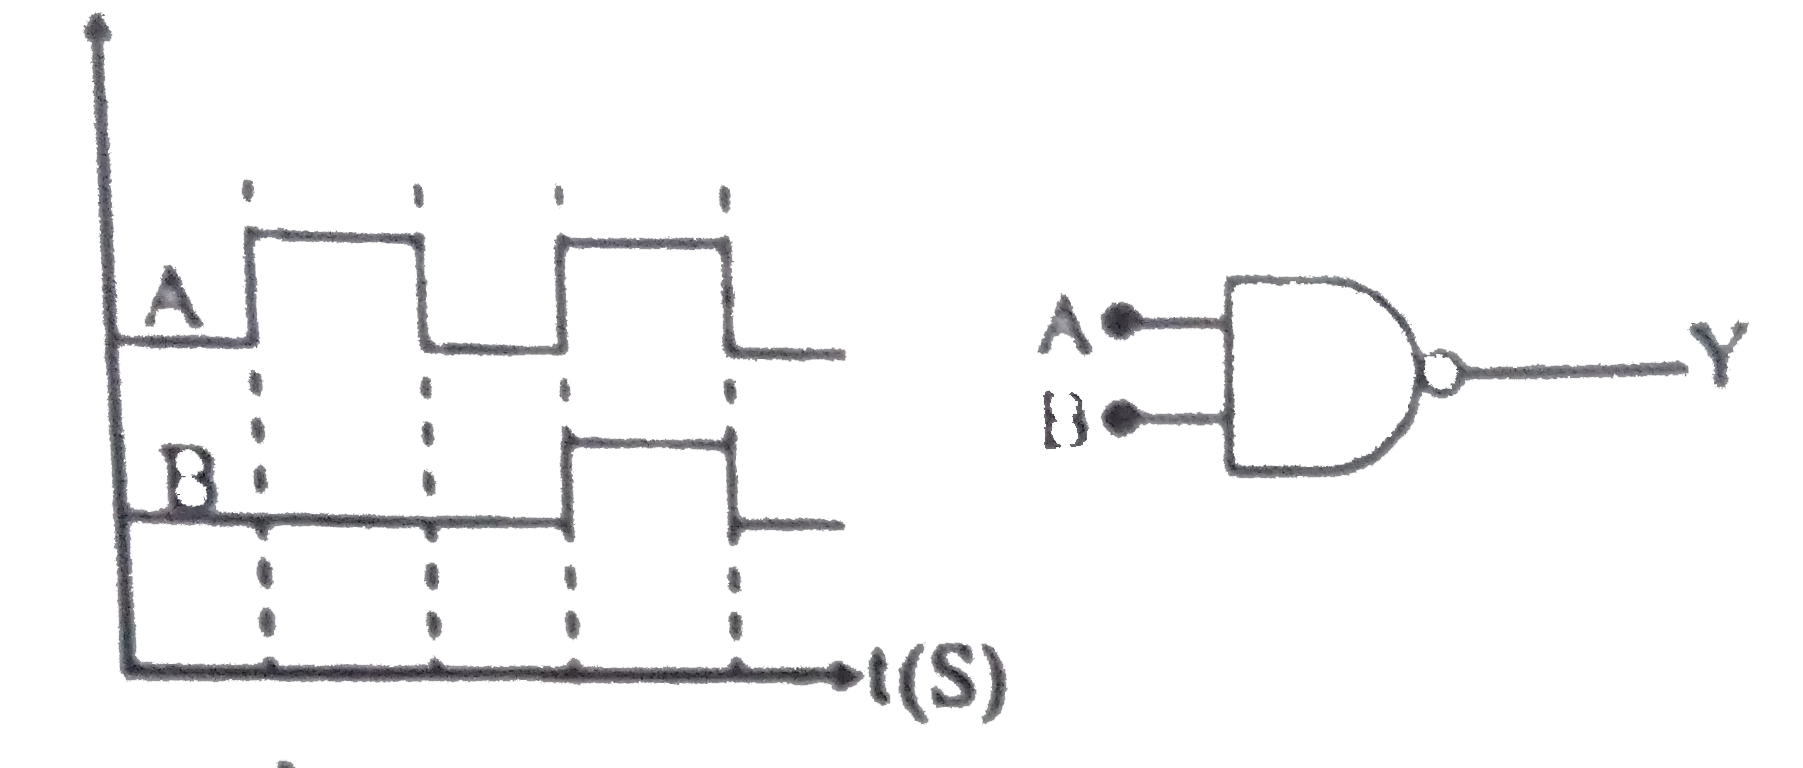 The real time variation of input signals A & B are as shown below. If the inputs are into NAND gate, then select the output signals from the following-